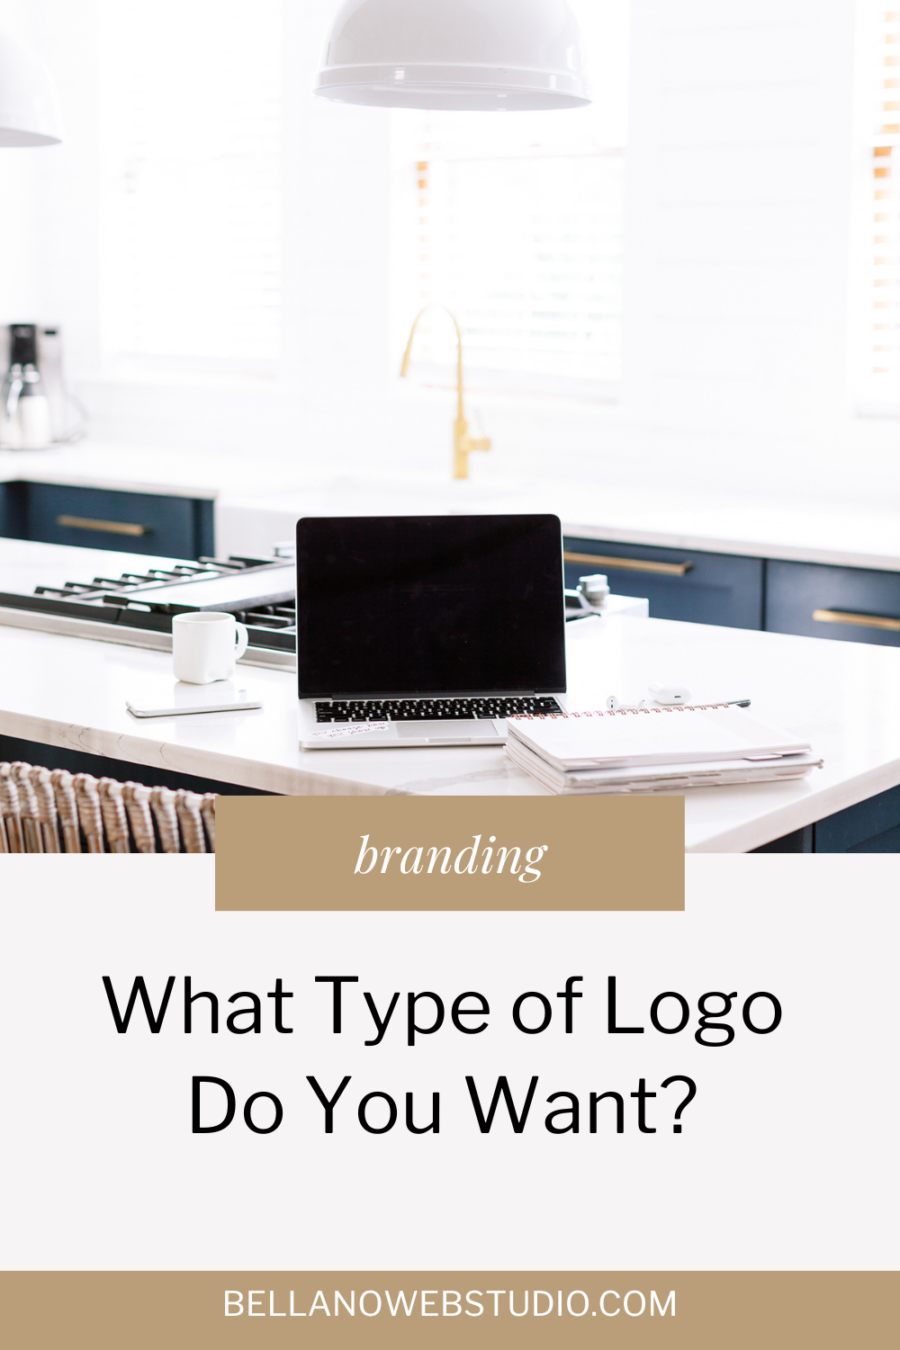 What Type of Logo Do You Want